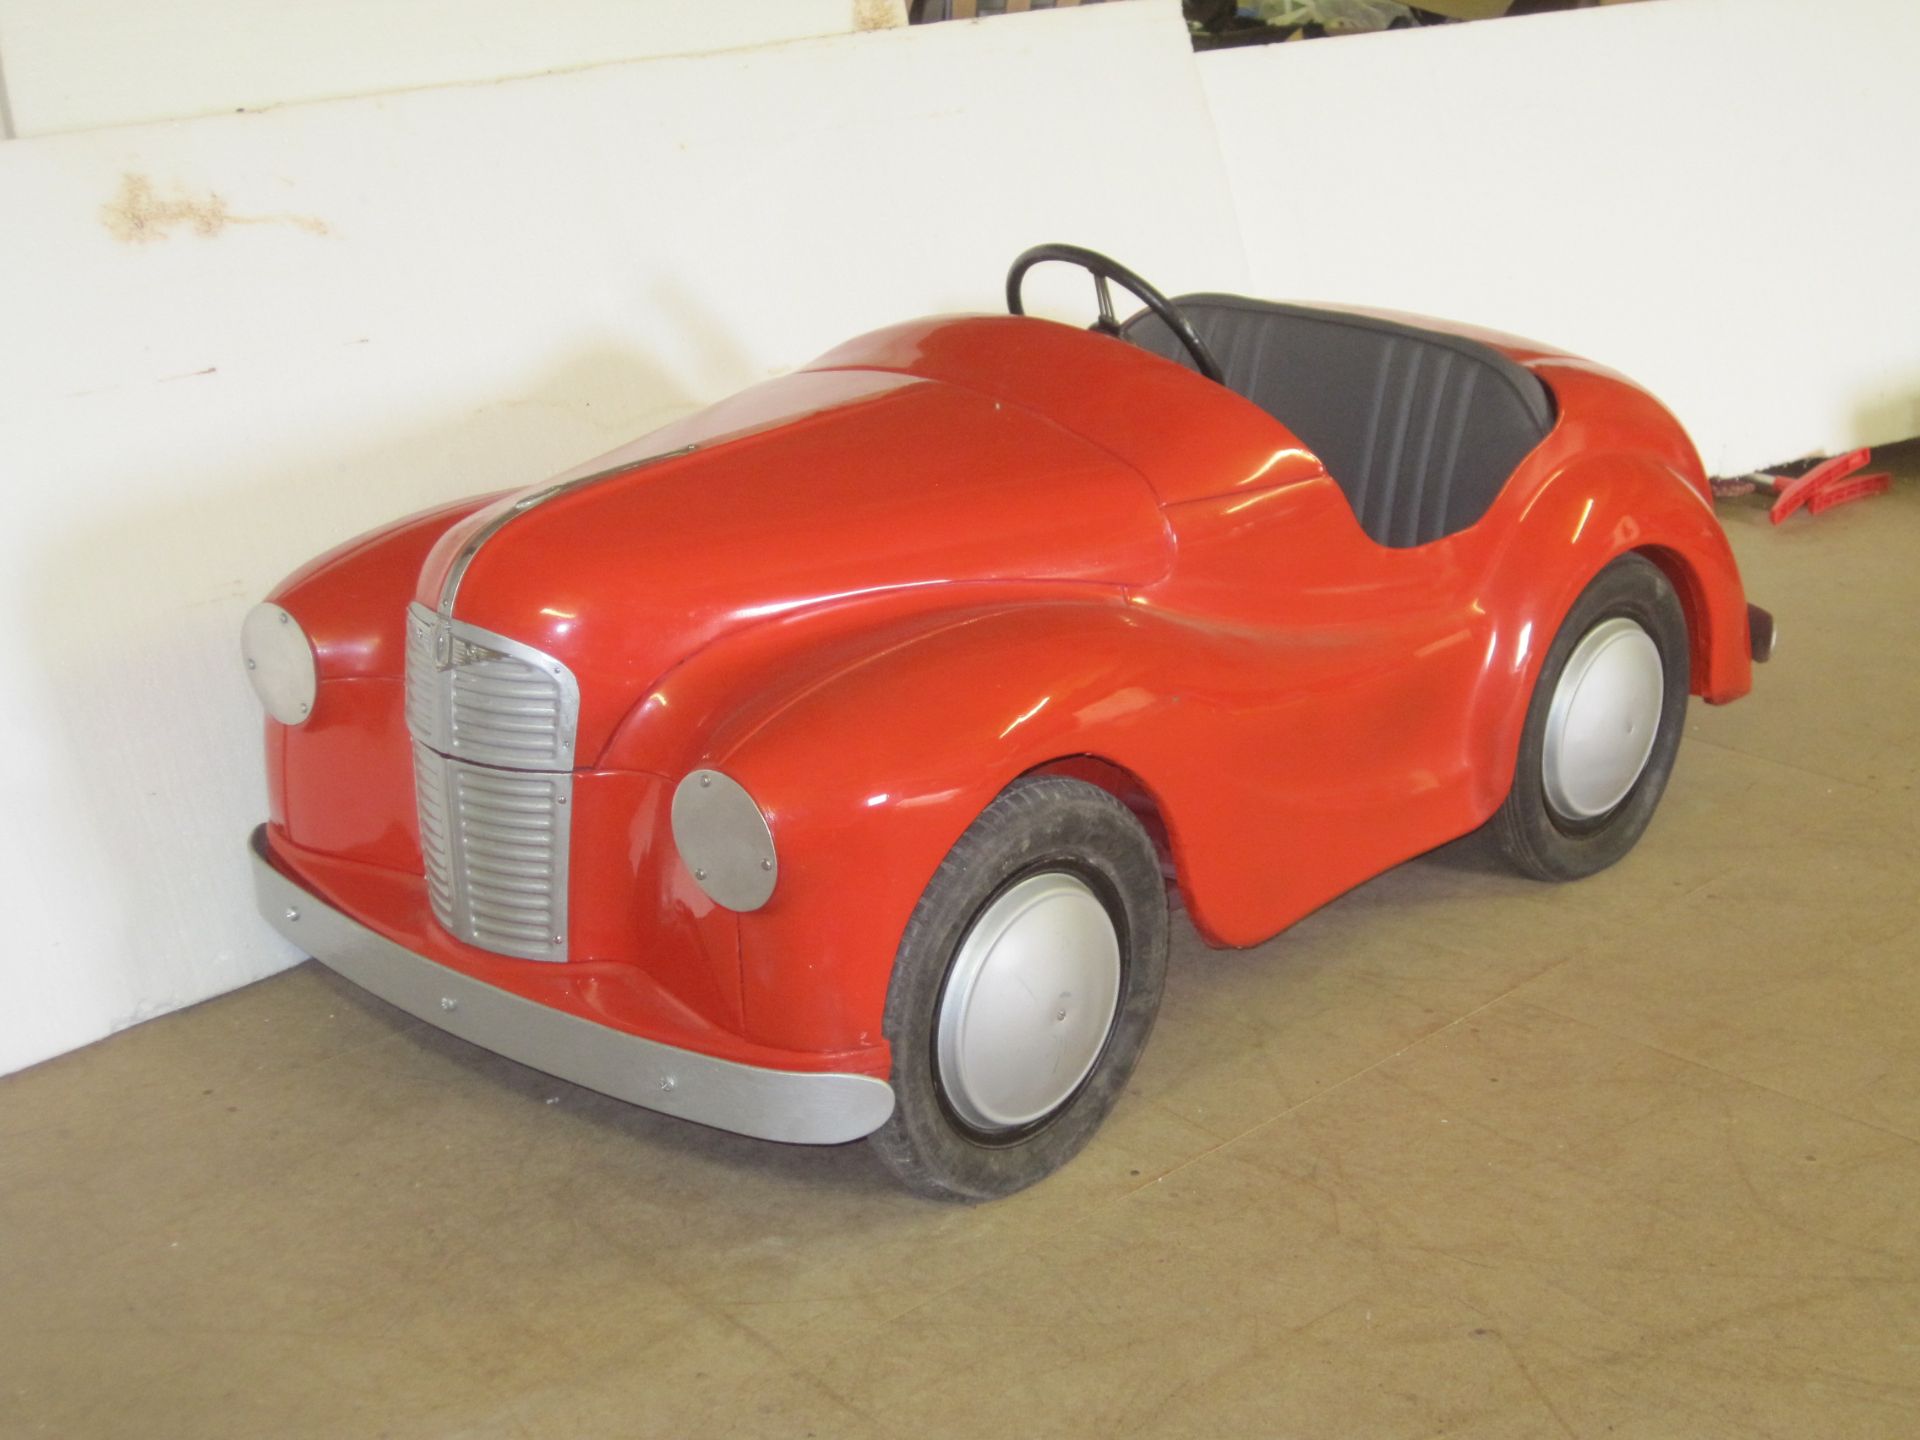 1948 Austin J40 pedal car, an older restoration from a private collection - Image 2 of 8